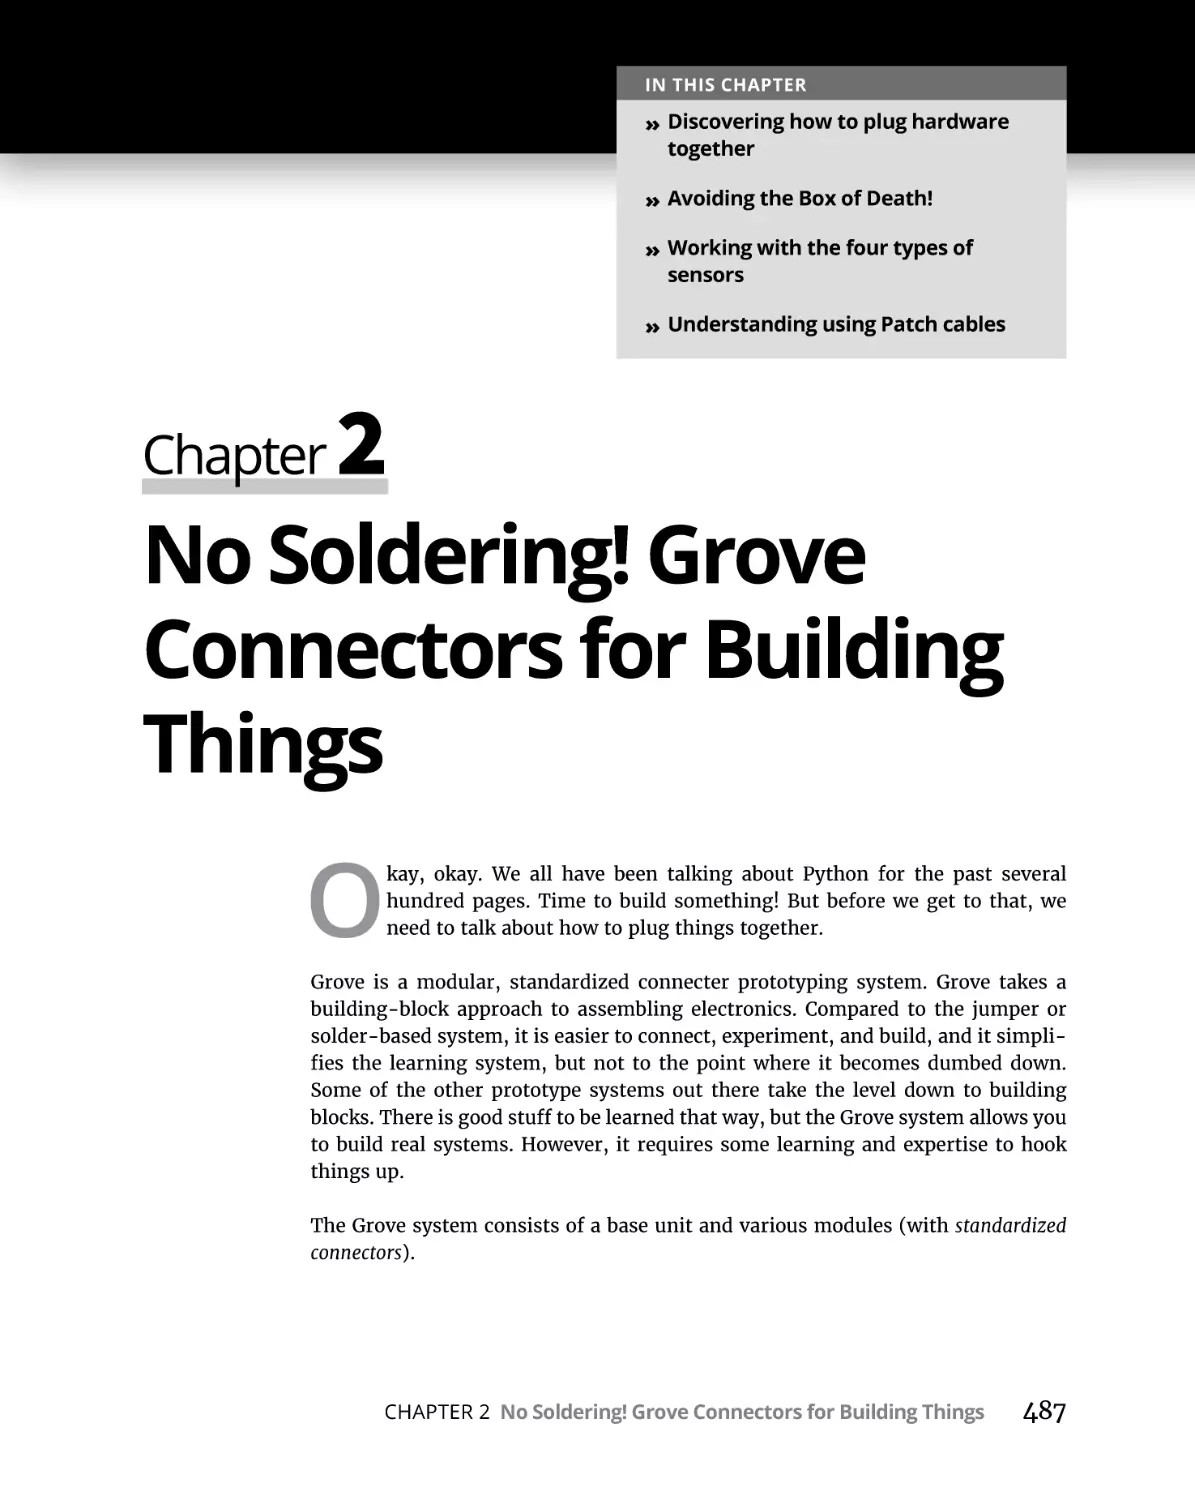 Chapter 2 No Soldering! Grove Connectors for Building Things